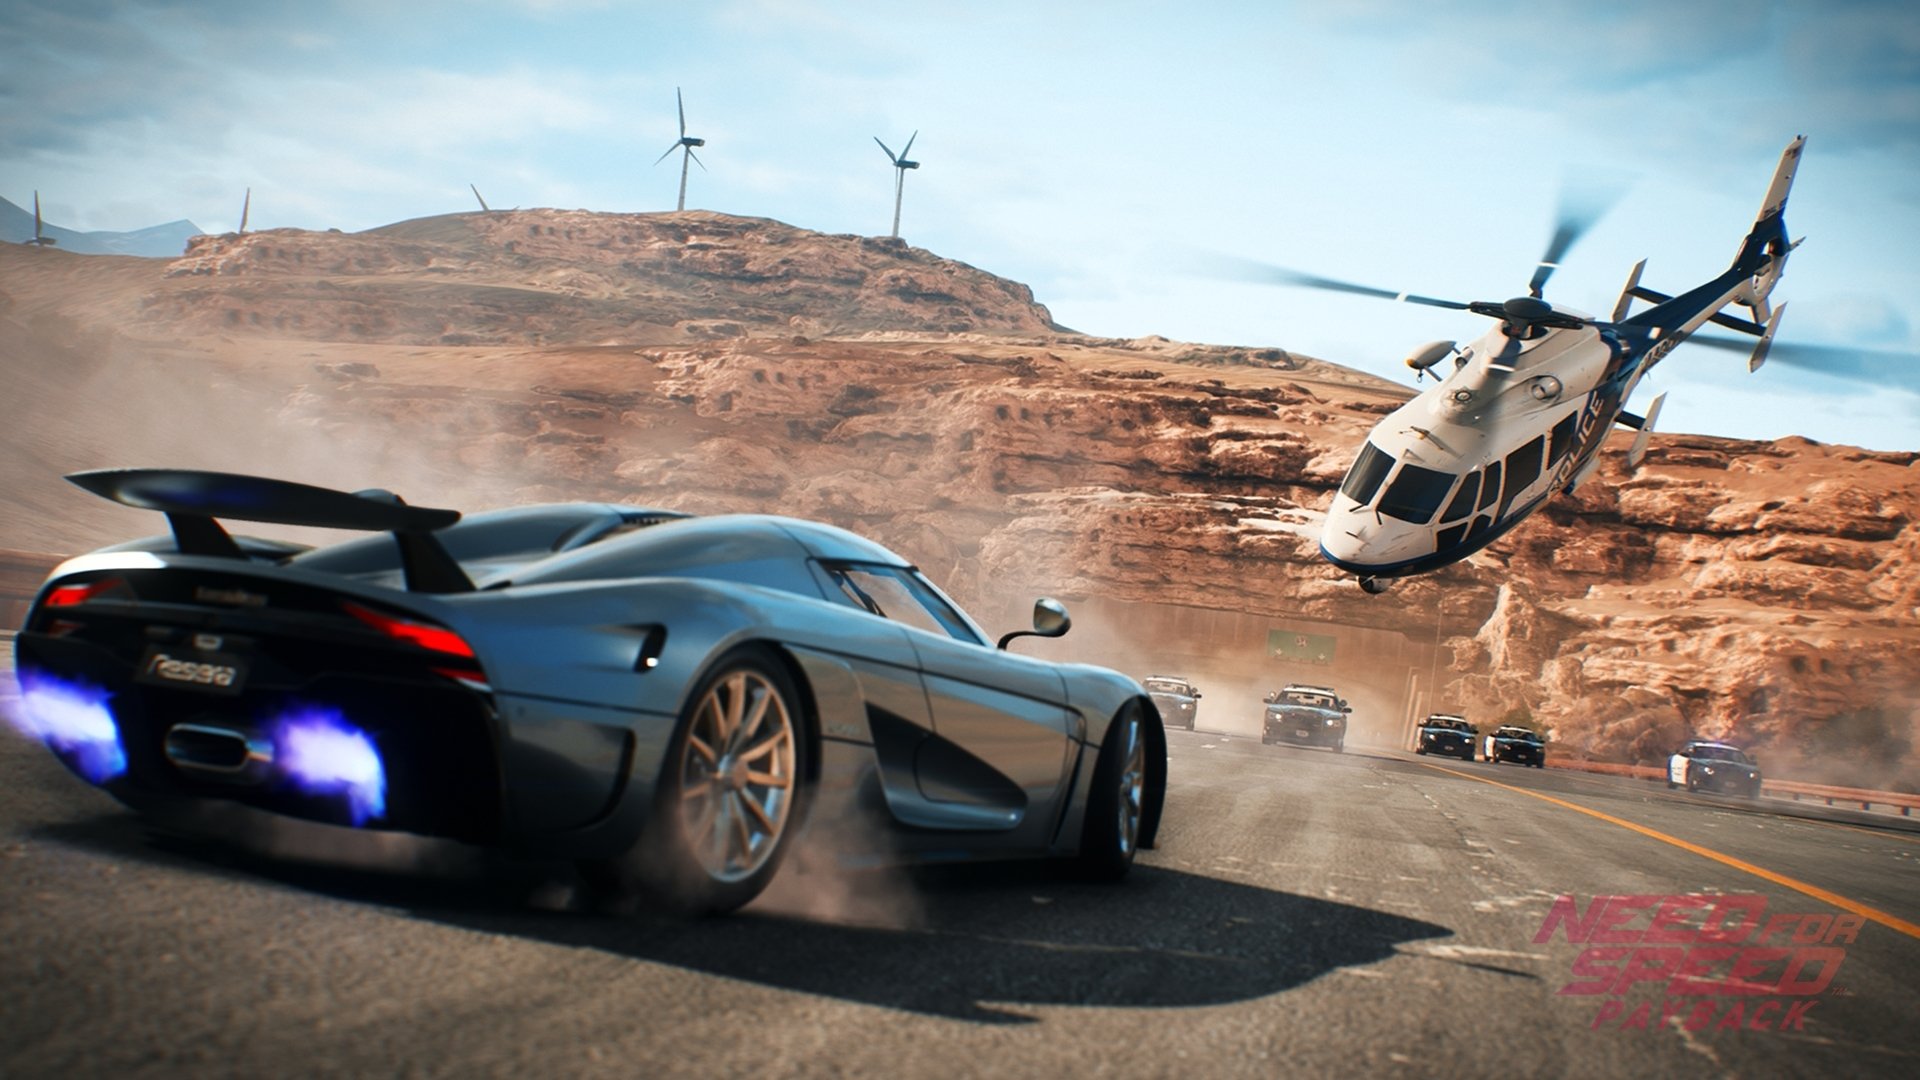 69 Need For Speed Payback Hd Wallpapers Background Images Wallpaper Abyss